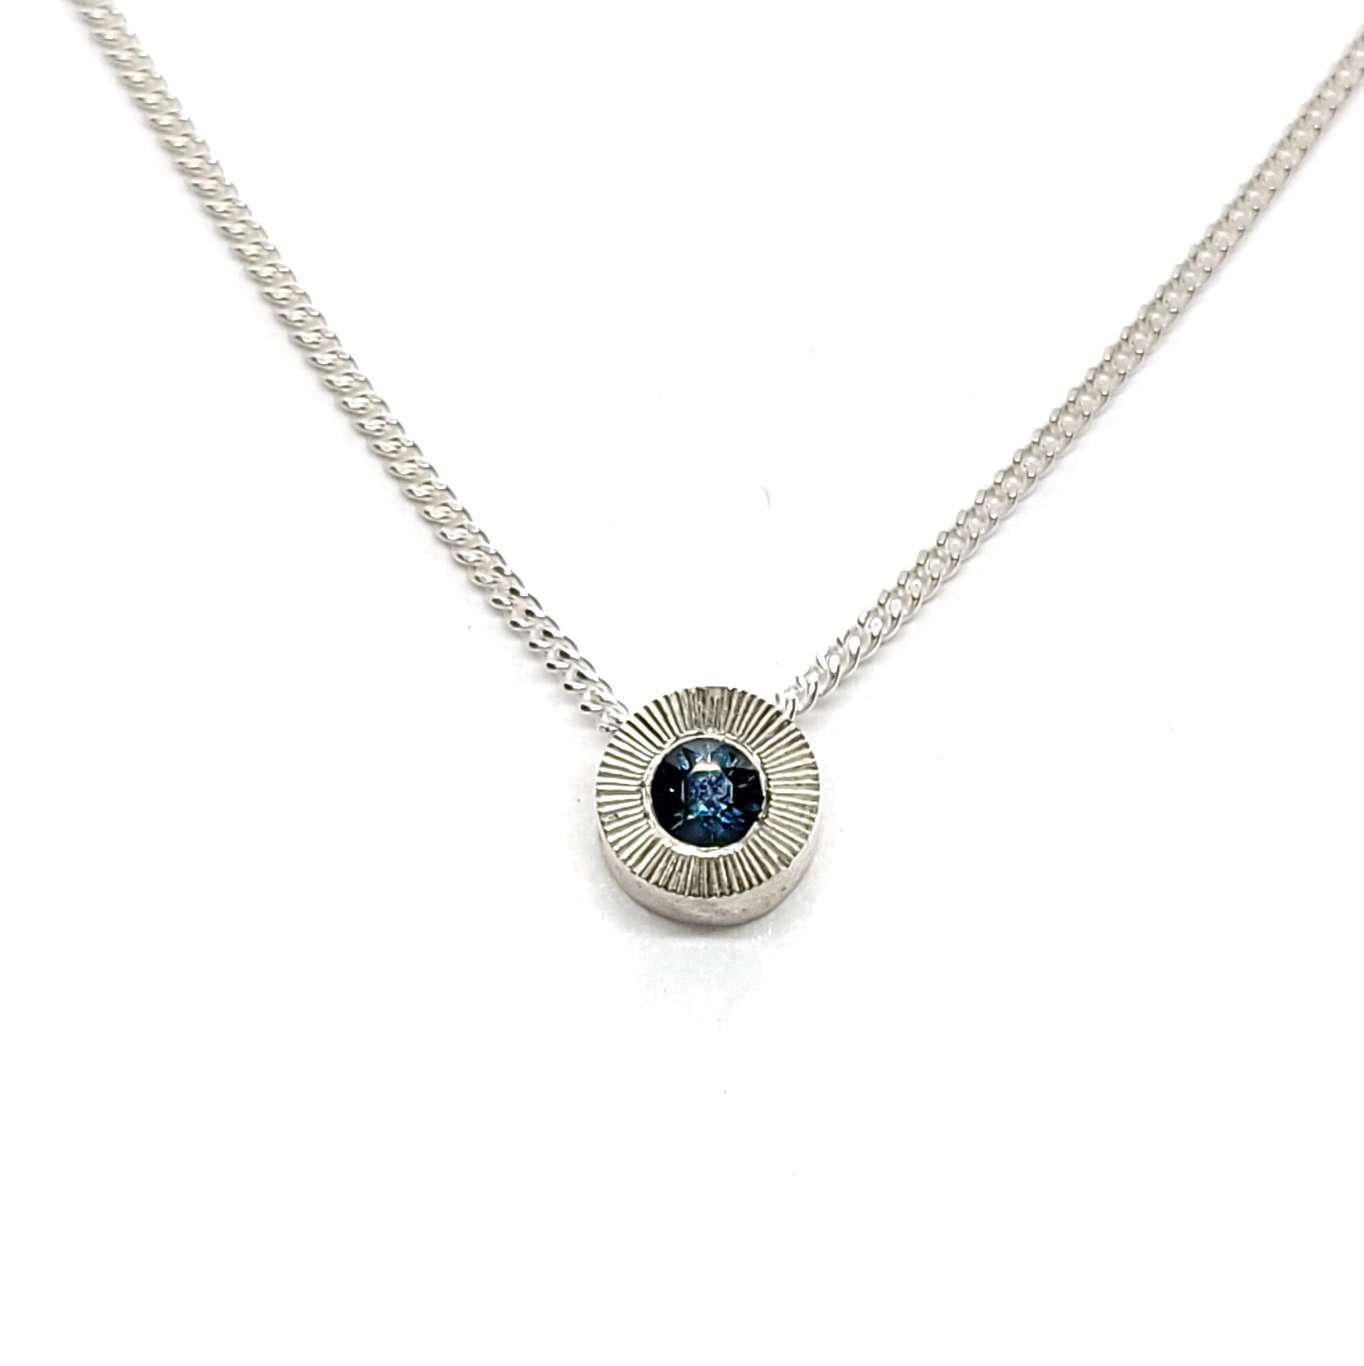 Necklace - Small Aurora in Blue Sapphire and Sterling Silver by Corey Egan